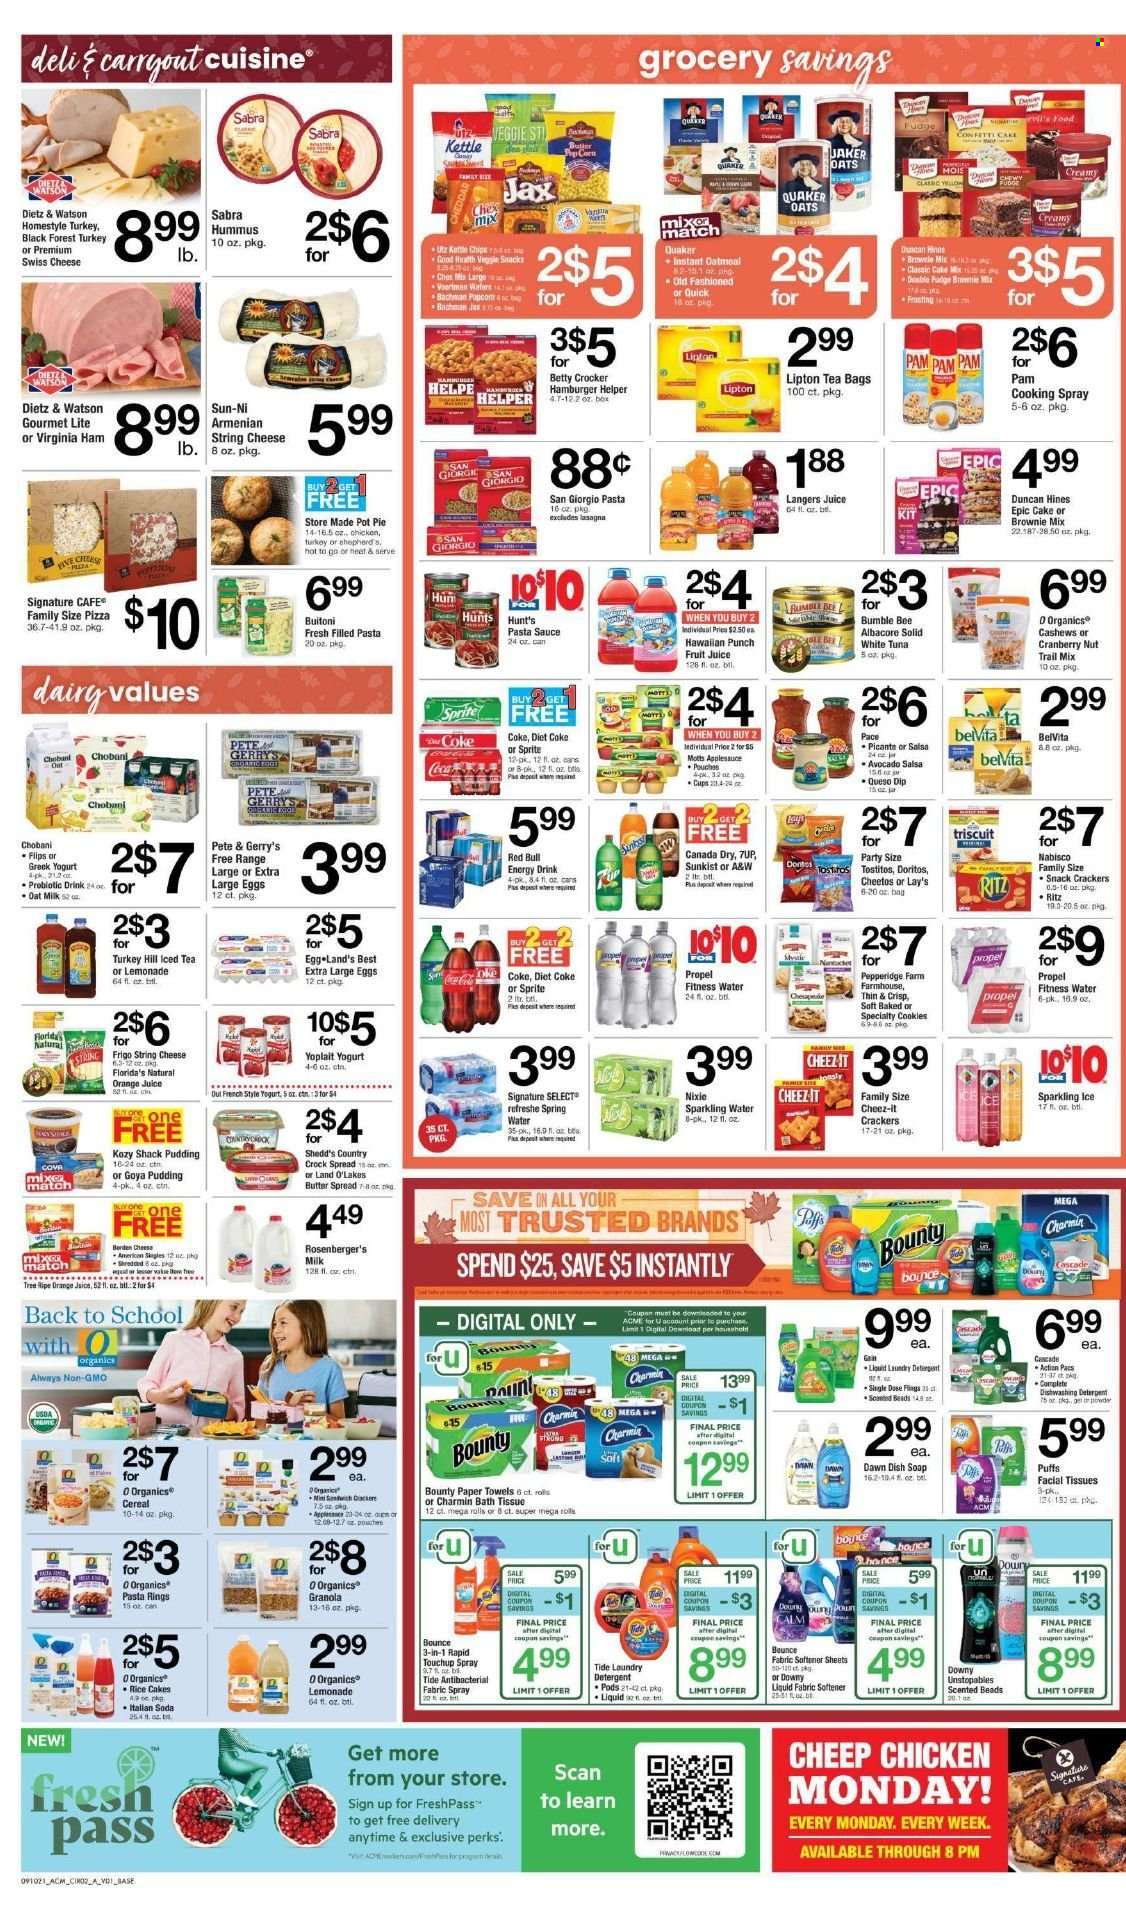 thumbnail - ACME Flyer - 09/10/2021 - 09/16/2021 - Sales products - pie, pot pie, puffs, brownie mix, cake mix, Mott's, tuna, pizza, pasta sauce, sandwich, Bumble Bee, sauce, Quaker, Buitoni, filled pasta, ham, virginia ham, Dietz & Watson, hummus, string cheese, swiss cheese, greek yoghurt, pudding, yoghurt, Yoplait, Chobani, milk, oat milk, large eggs, butter, dip, fudge, wafers, snack, Bounty, crackers, Florida's Natural, RITZ, Doritos, Cheetos, chips, Lay’s, kettle, Cheez-It, Tostitos, Chex Mix, frosting, oatmeal, Goya, cereals, granola, belVita, rice, salsa, cooking spray, apple sauce, cashews, trail mix, Canada Dry, Coca-Cola, lemonade, Sprite, orange juice, juice, fruit juice, energy drink, Lipton, Diet Coke, 7UP, Red Bull, A&W, spring water, soda, sparkling water, tea bags, L'Or, punch, bath tissue, kitchen towels, paper towels, Charmin, Gain, Cascade, Tide, Unstopables, fabric softener, Bounce, Downy Laundry, soap, facial tissues, pot, cup. Page 2.